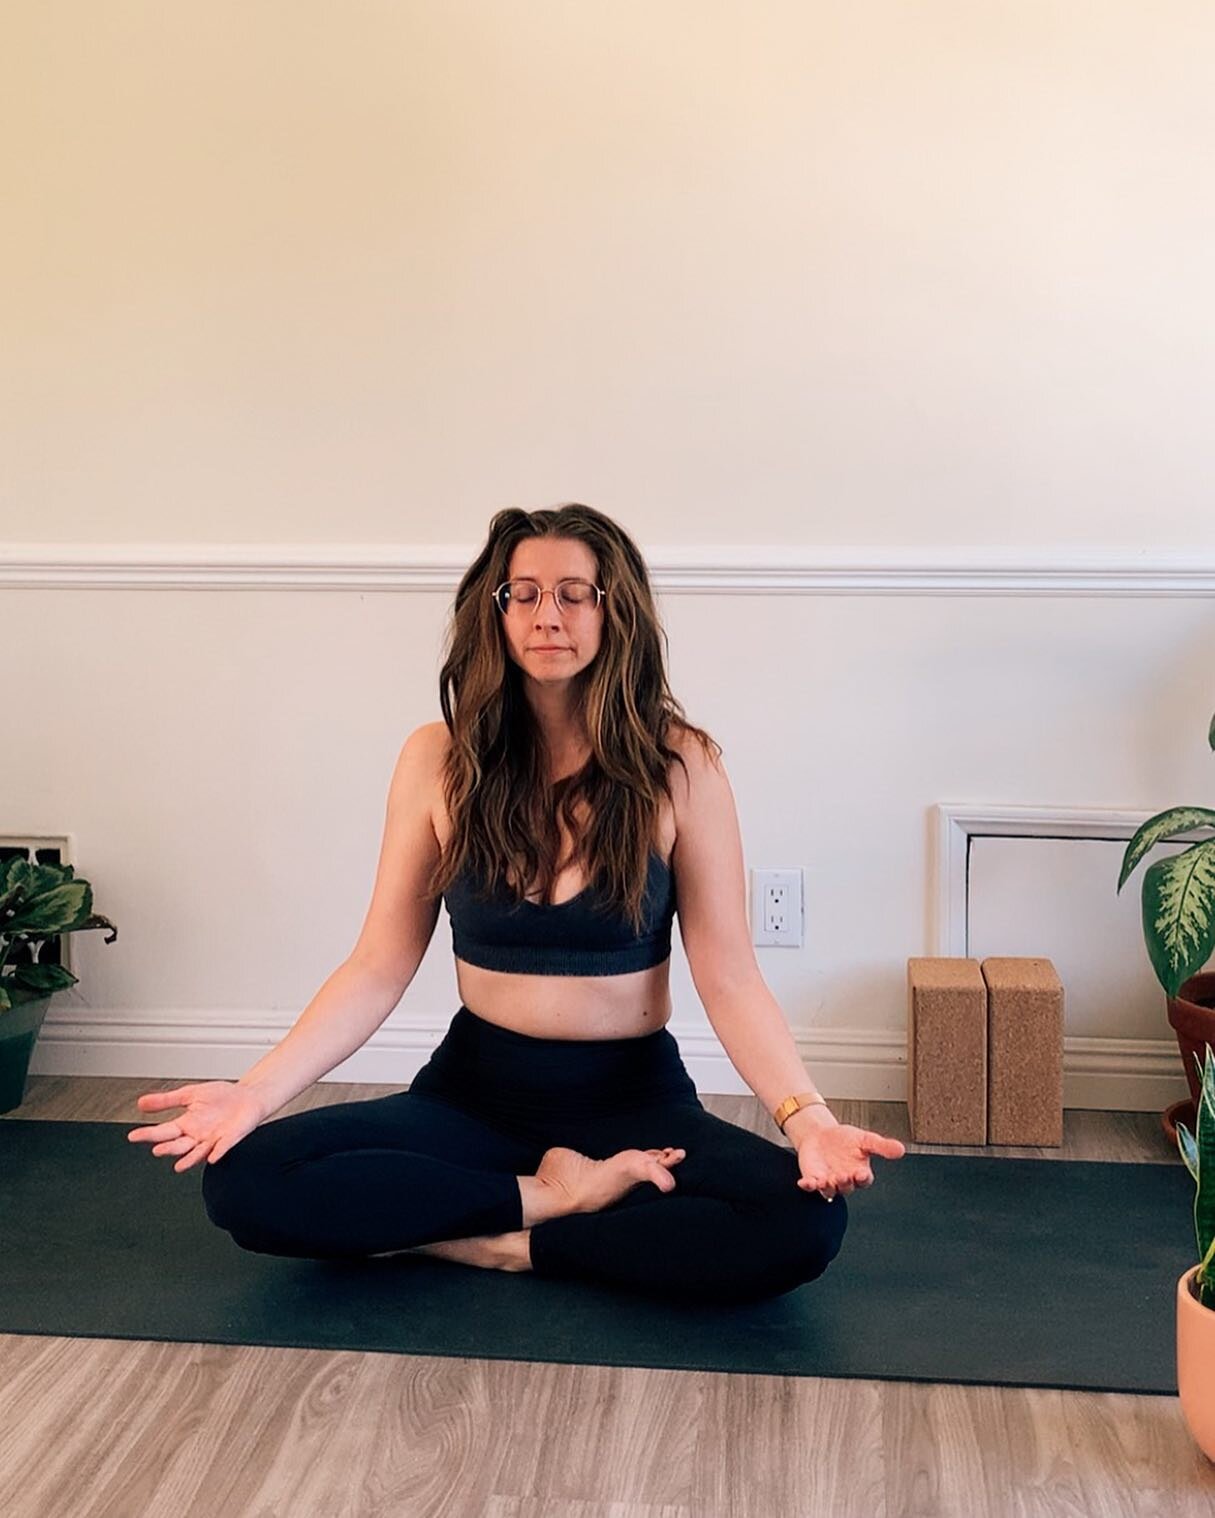 &bull; new class&mdash; guided meditation &bull;
Really excited to be offering meditation classes as a part of my regular schedule!

Join for a 30 minute practice that meets you where you are. This is an open level meditation that includes instructio